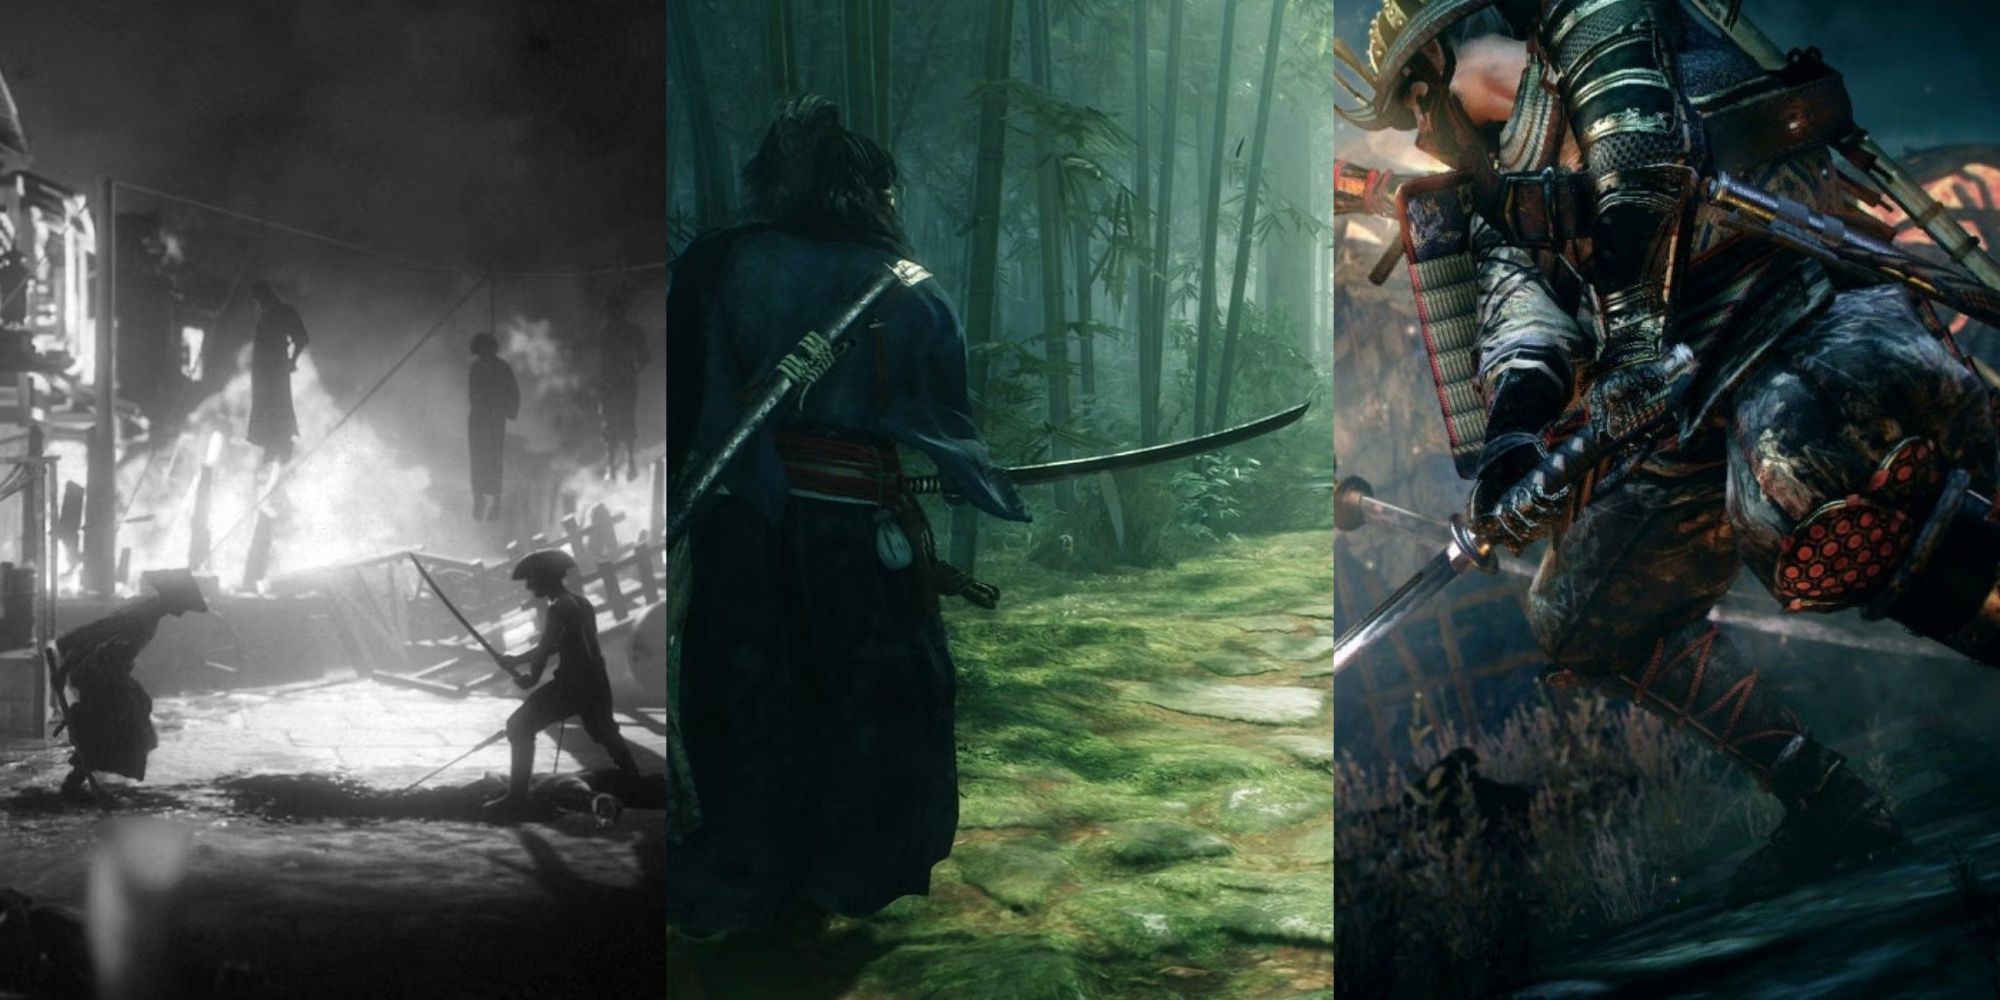 Best Samurai Games If You Like Ghost Of Tsushima Feature Image - Trek To Yomi, Rise Of The Ronin, And Nioh 2